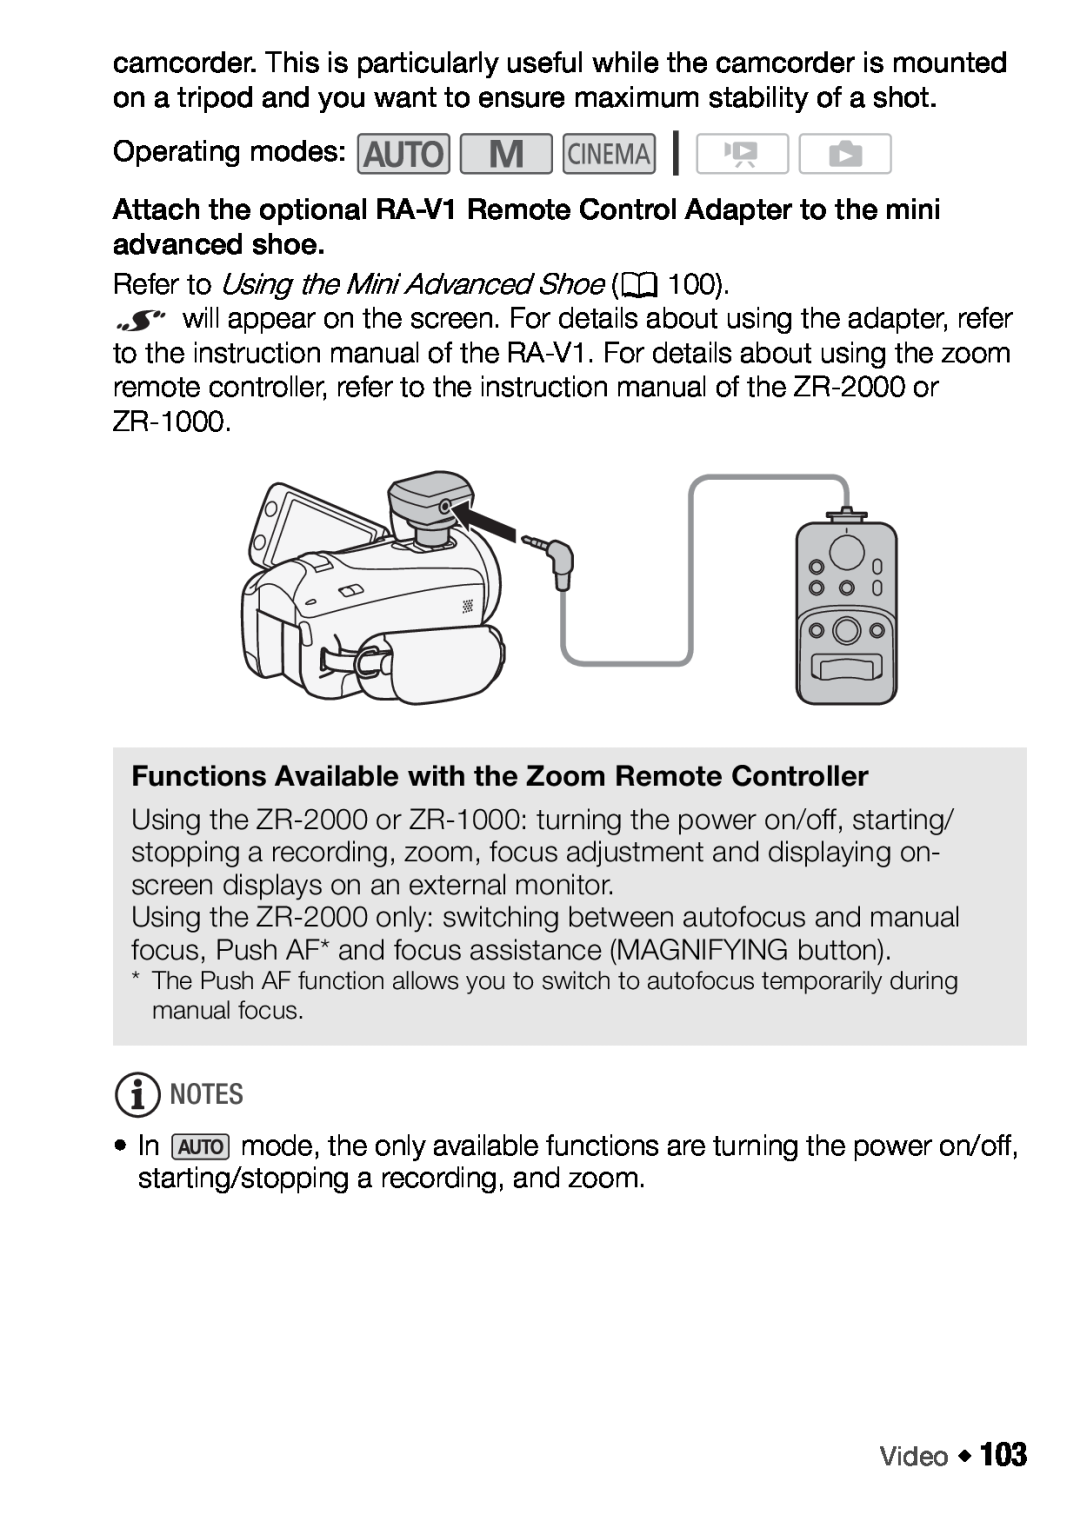 Canon HFM46, HFM406 Functions Available with the Zoom Remote Controller, Refer to Using the Mini Advanced Shoe 